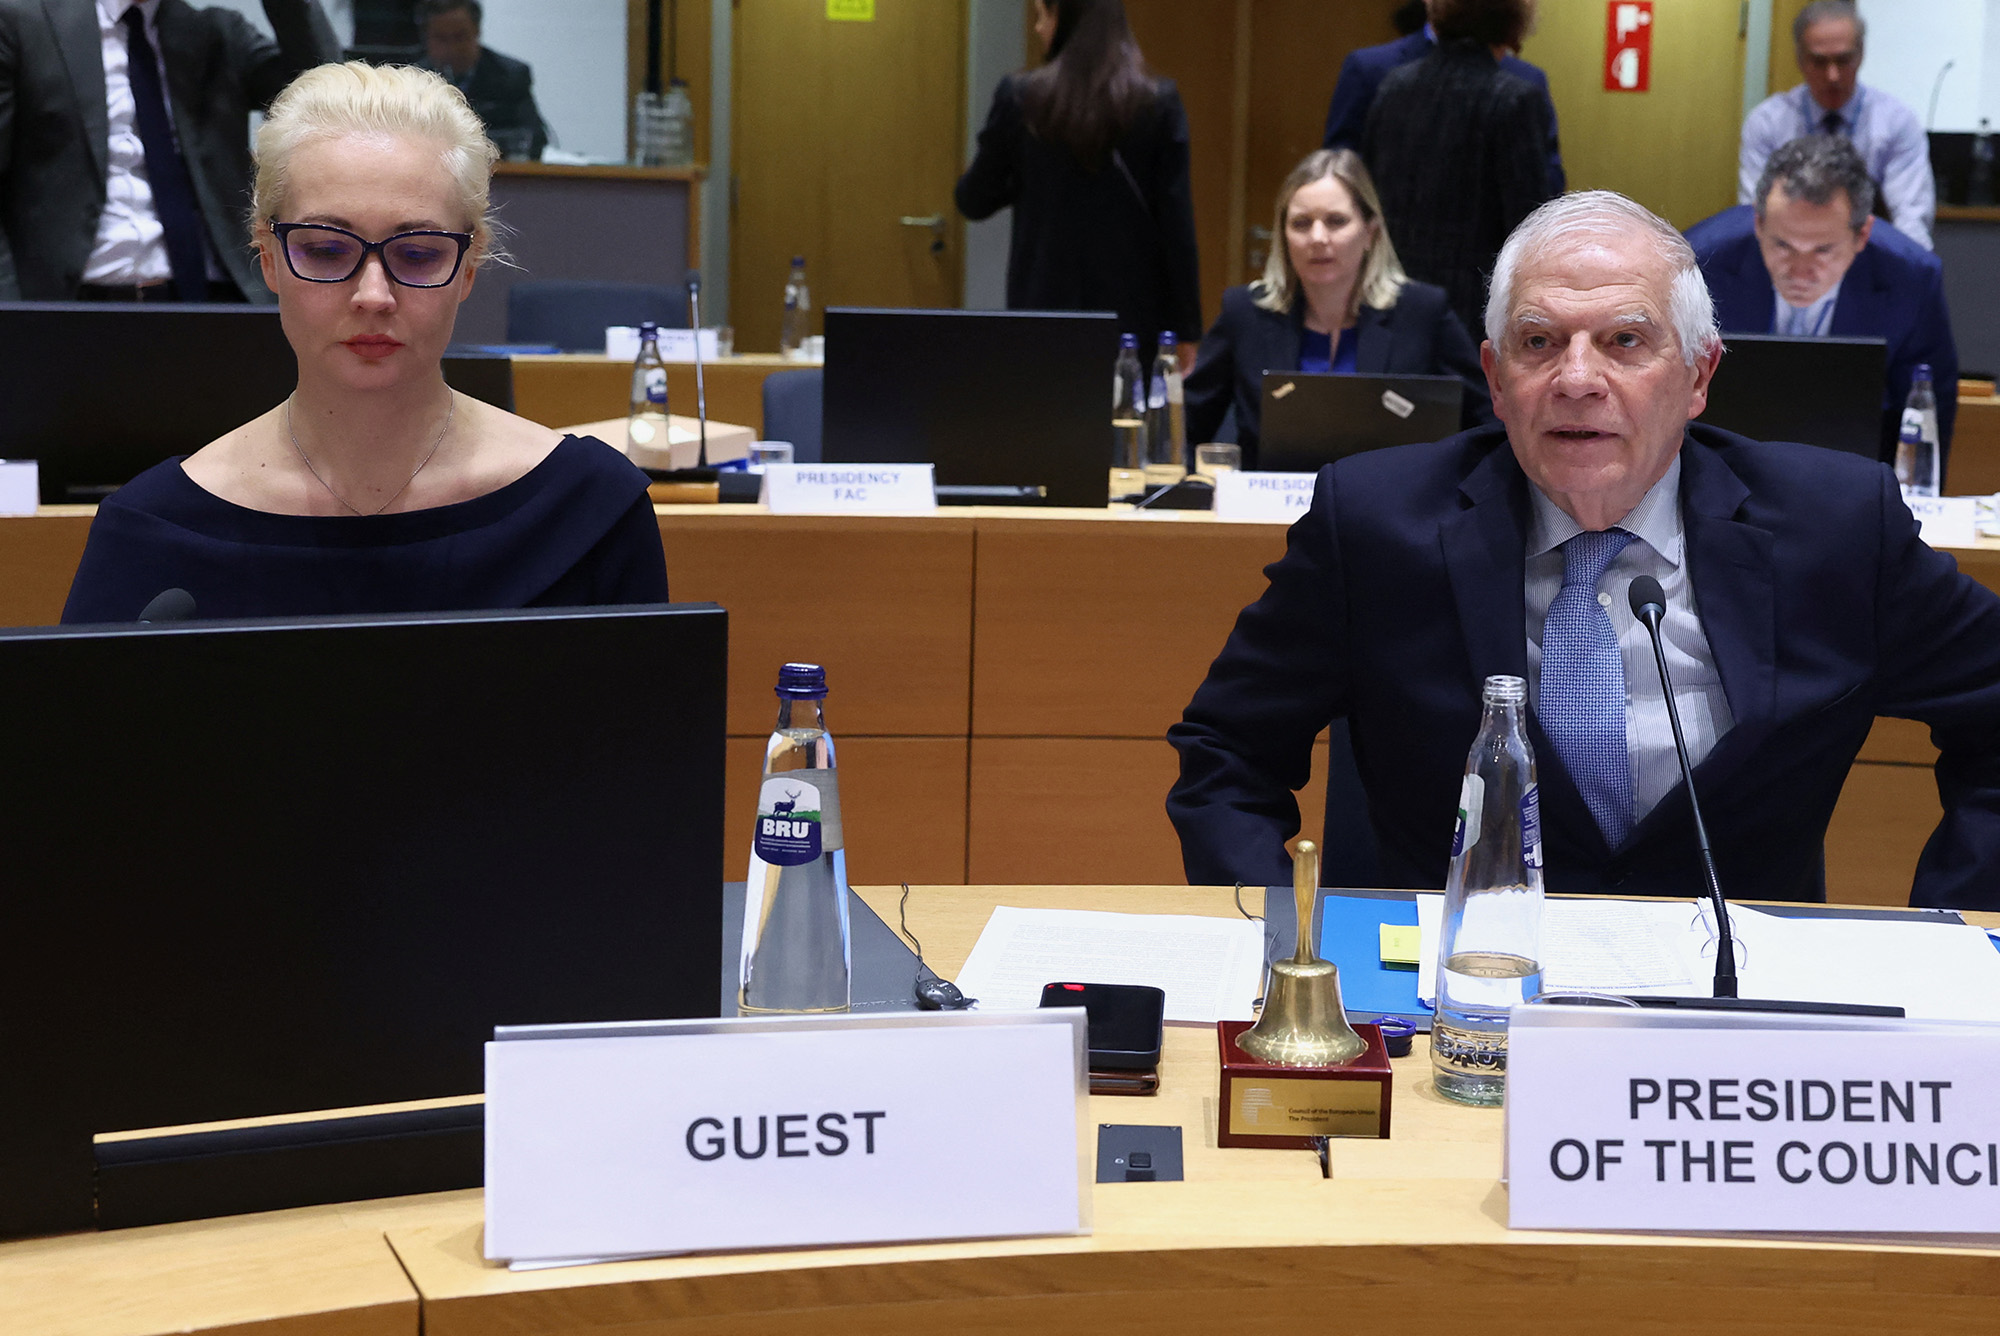 Yulia Navalnaya, the widow of Alexei Navalny, sits next to European Union Foreign Policy Chief Josep Borrell, as she takes part in a meeting of European Union foreign ministers in Brussels, Belgium, on February 19.